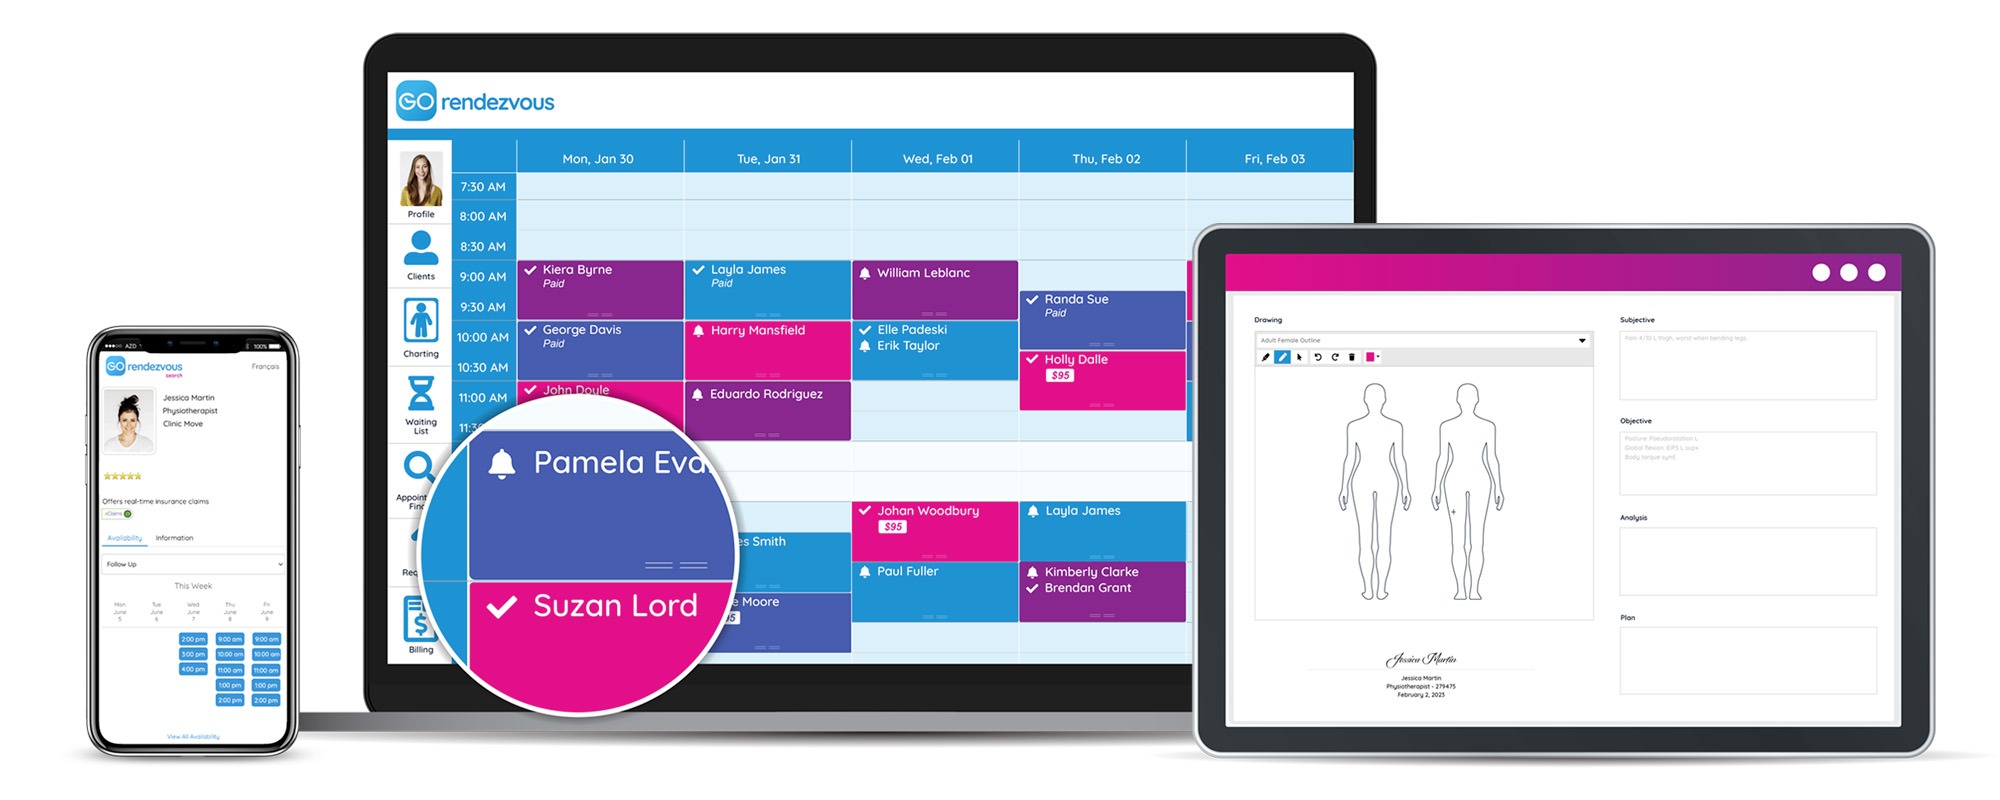 A view of a athletic therapist's GOrendezvous schedule on different devices